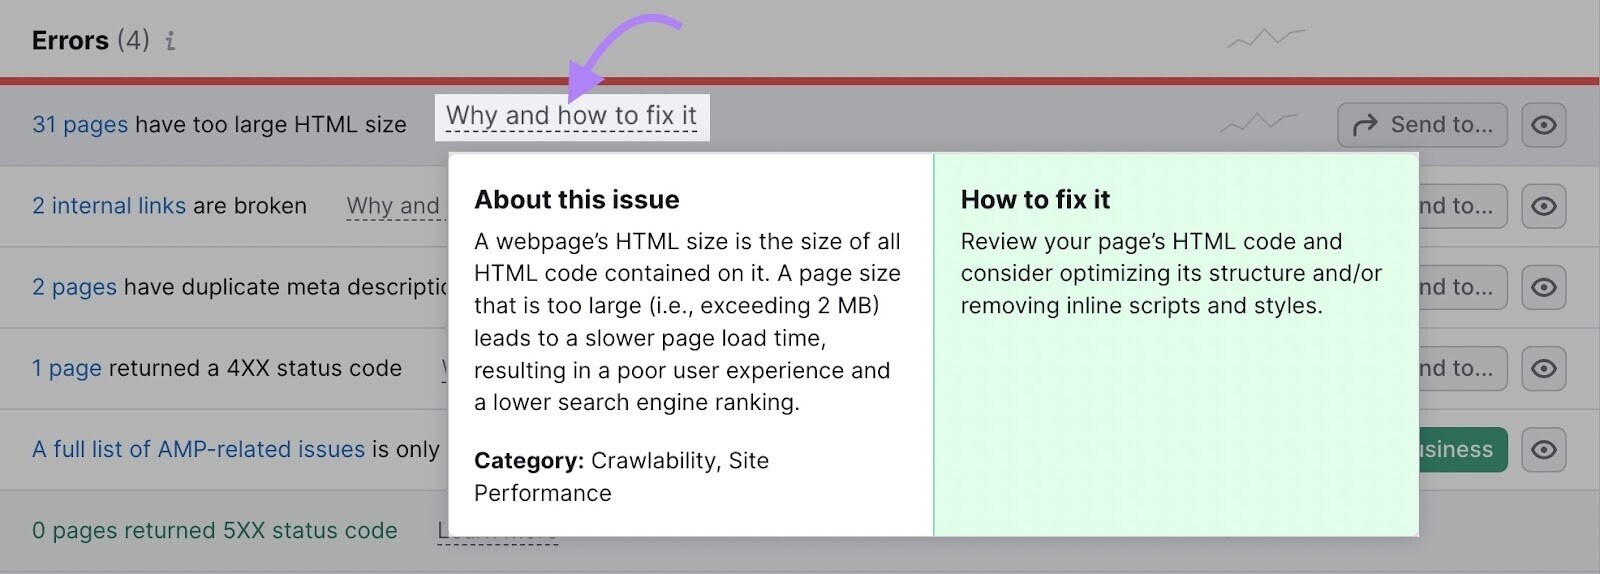 an example of "Why and how to fix it" section from the Site Audit tool